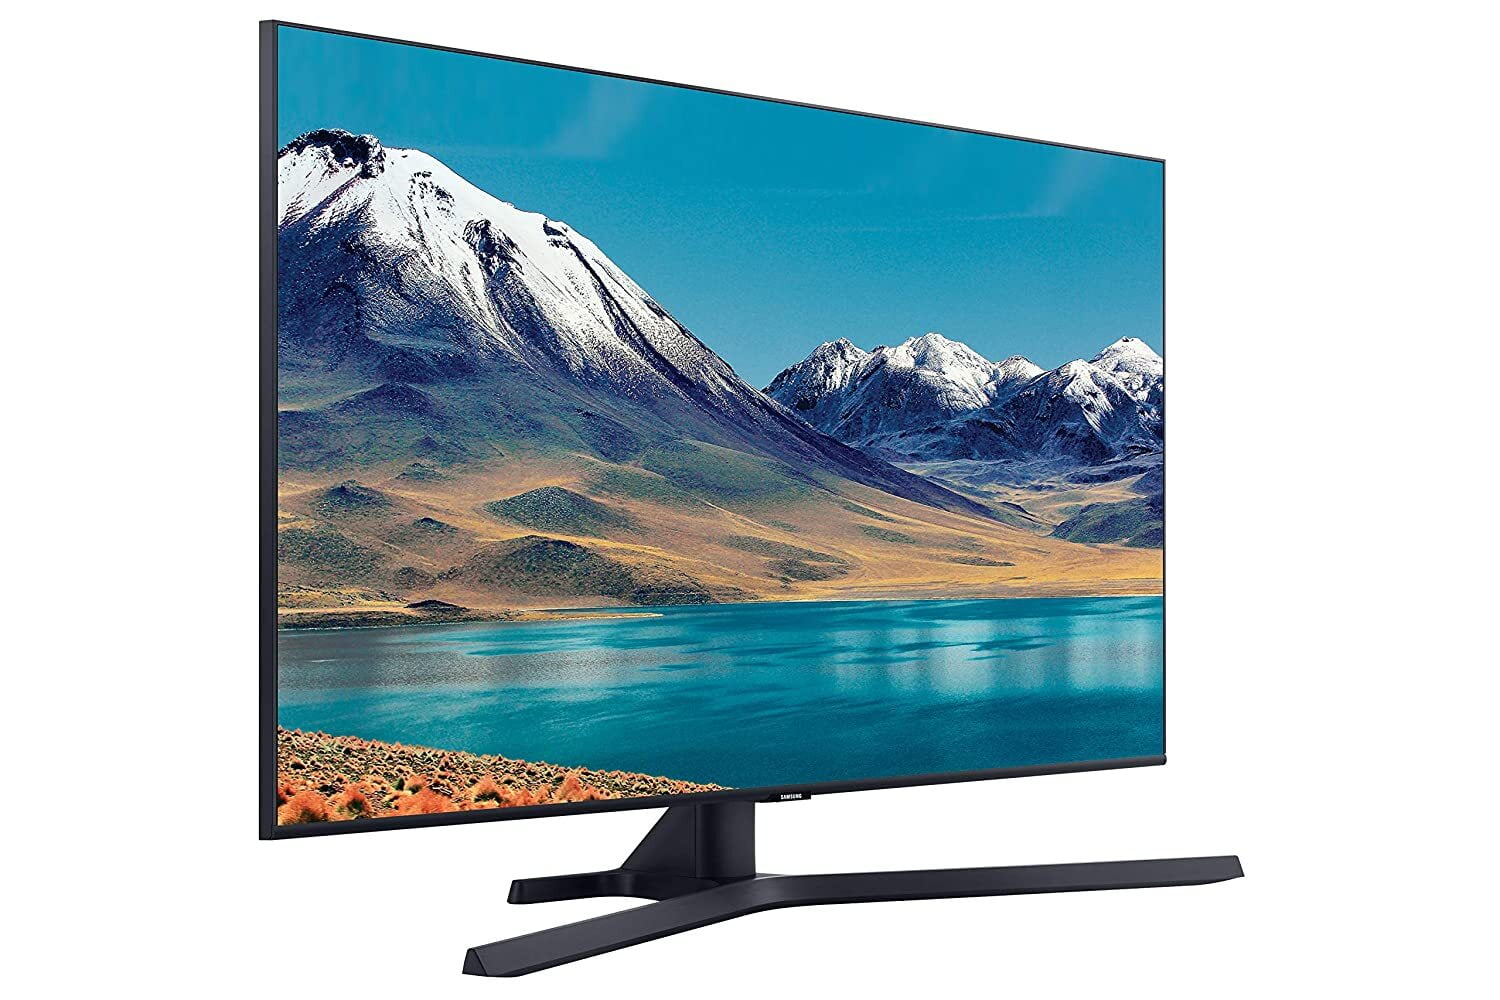 Samsung 43 inches 43TU8570 4K Ultra HD Smart LED TV On Dillimall.Com